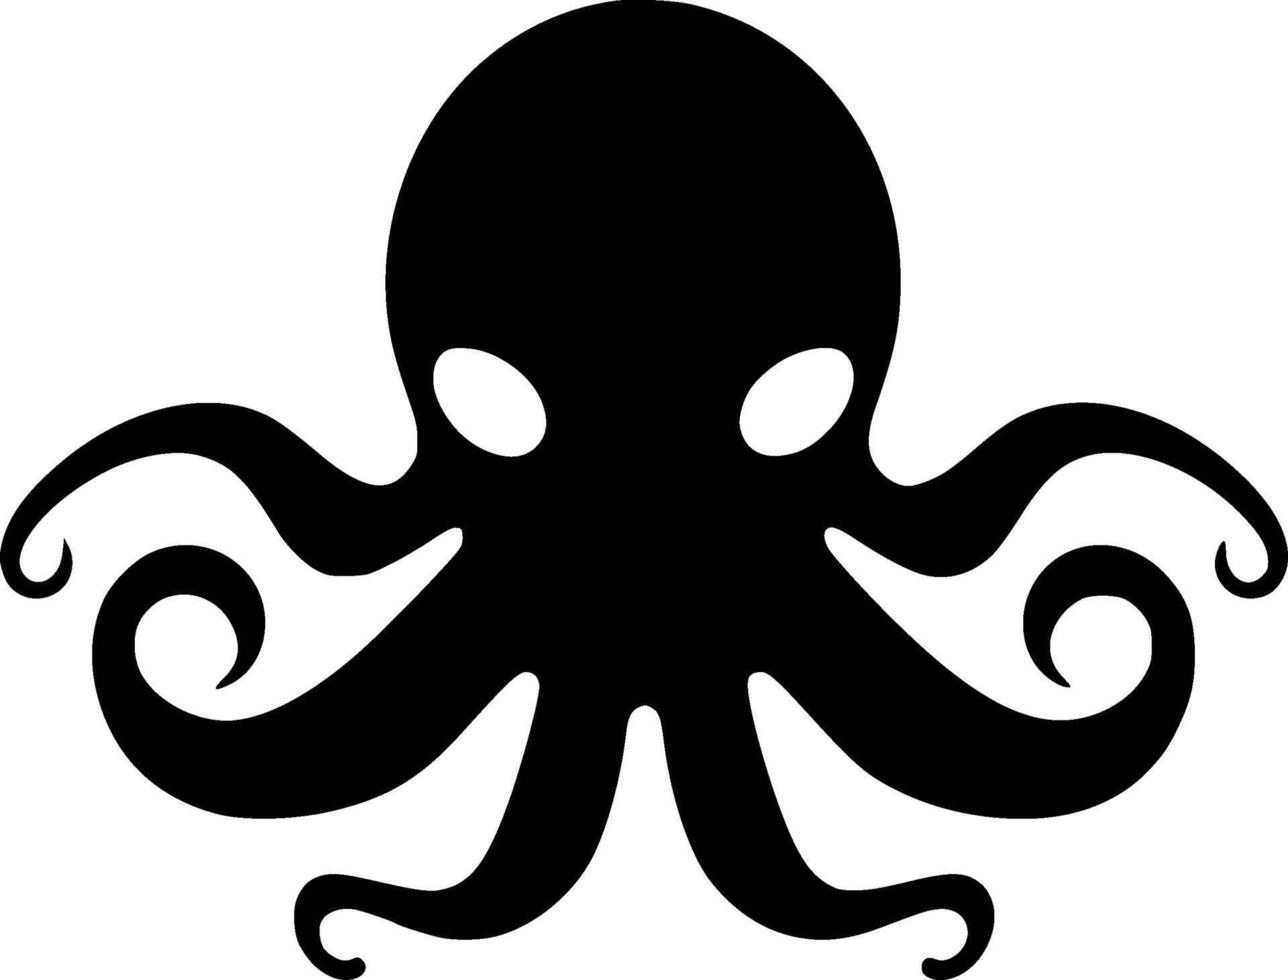 Octopus - High Quality Vector Logo - Vector illustration ideal for T-shirt graphic